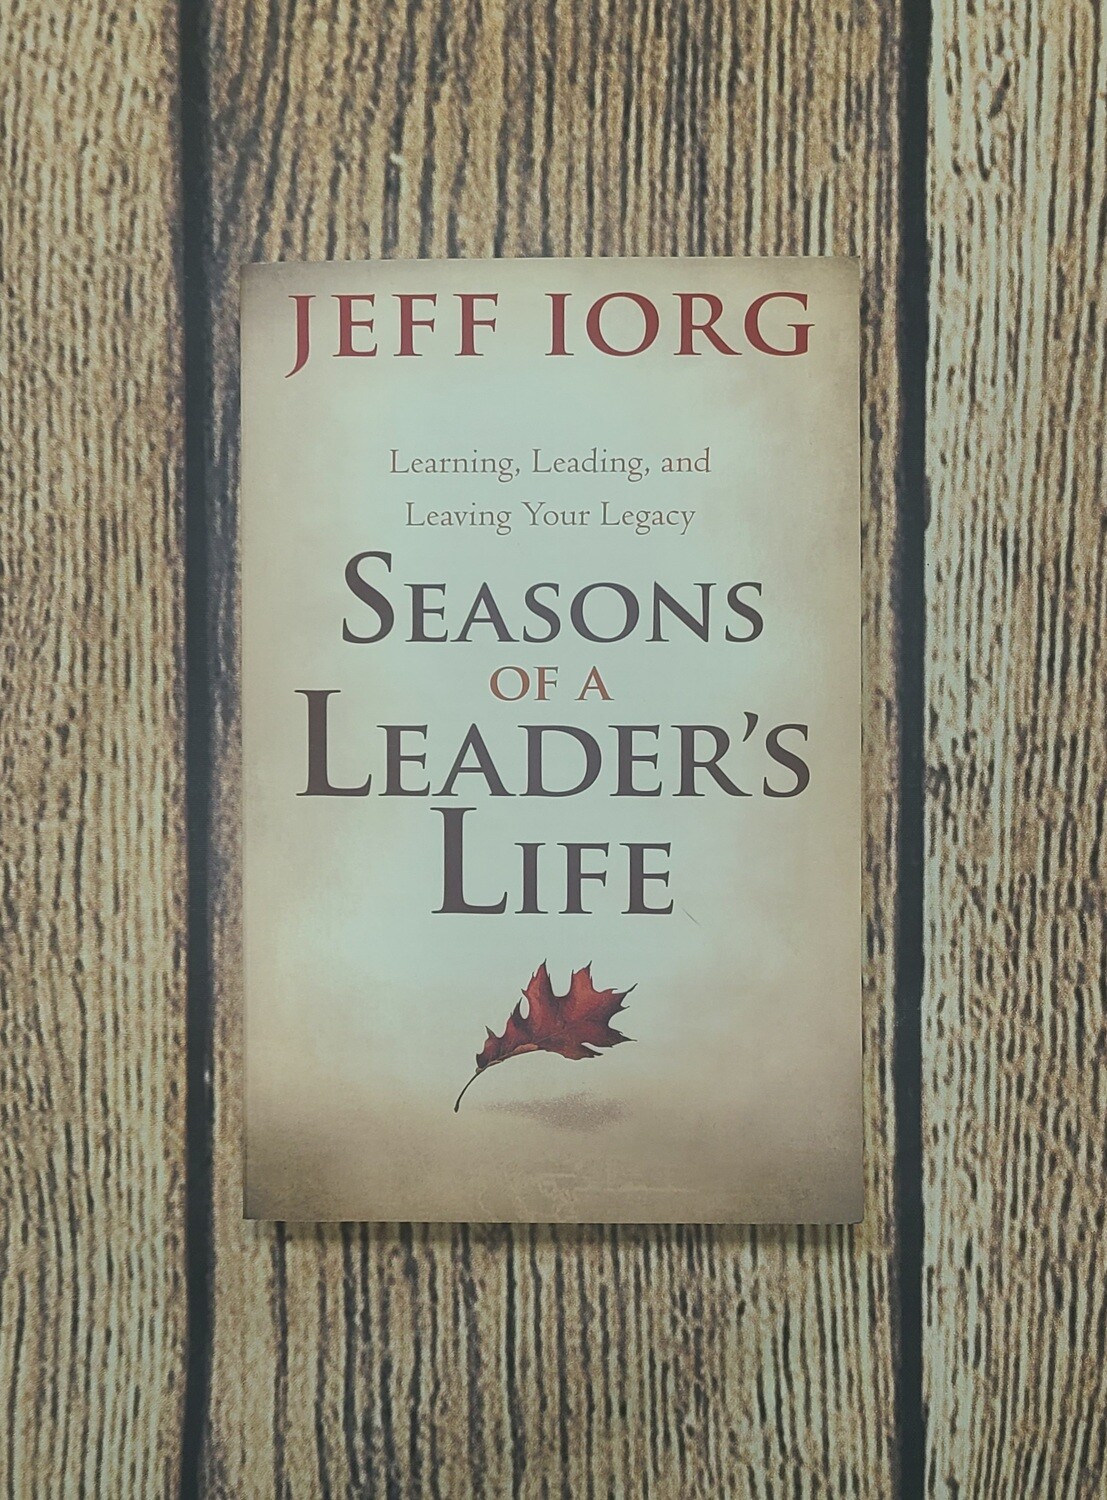 Seasons of a Leader's Life: Learning, Leading, and Leaving Your Legacy by Jeff Iorg